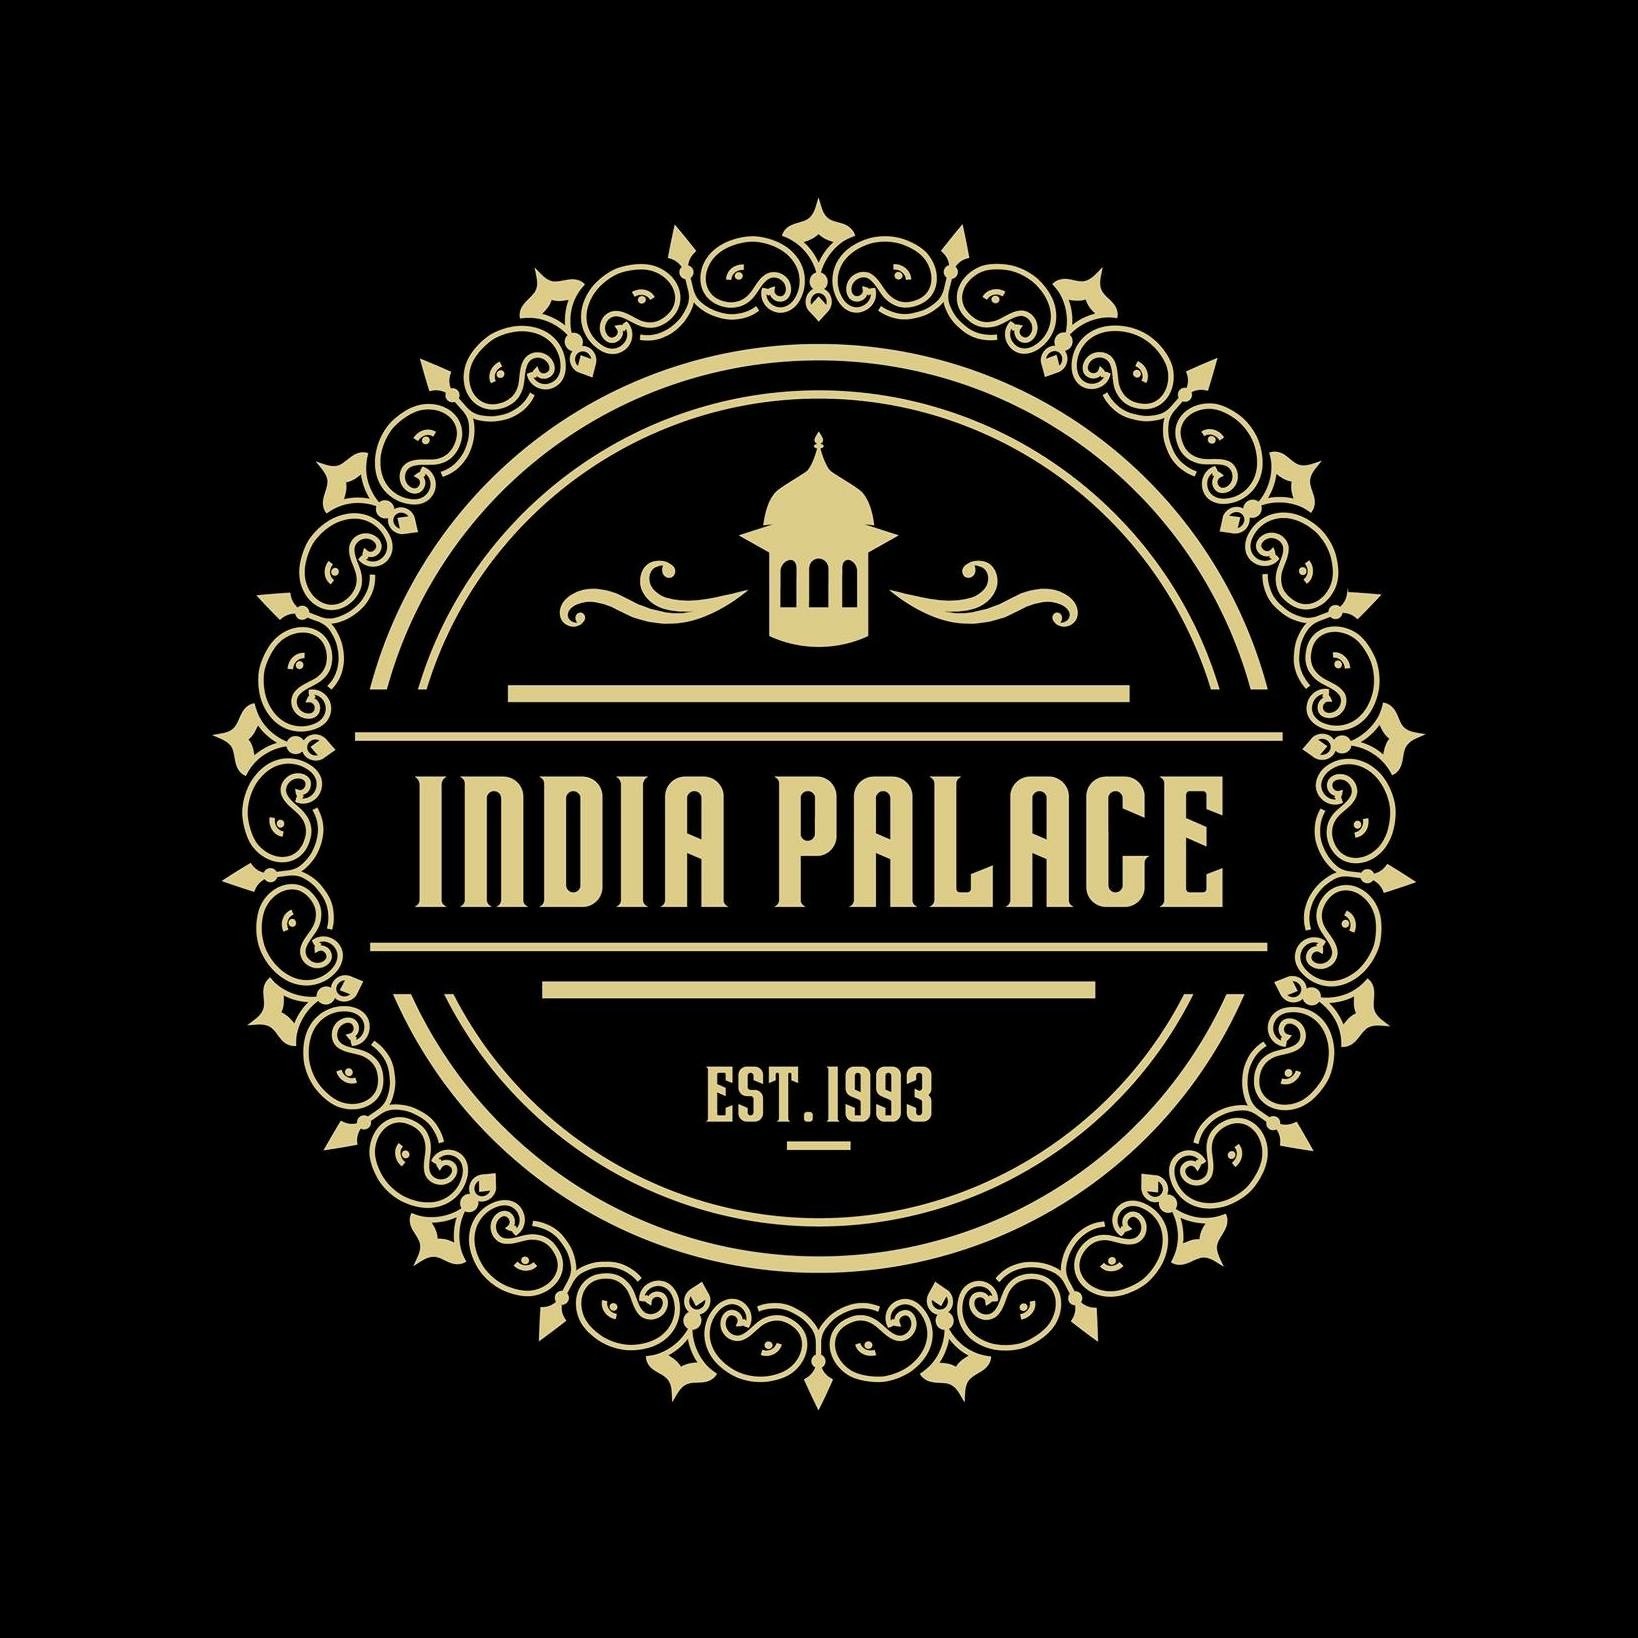 India Palace Banquet & Catering 3960 Fifth Ave